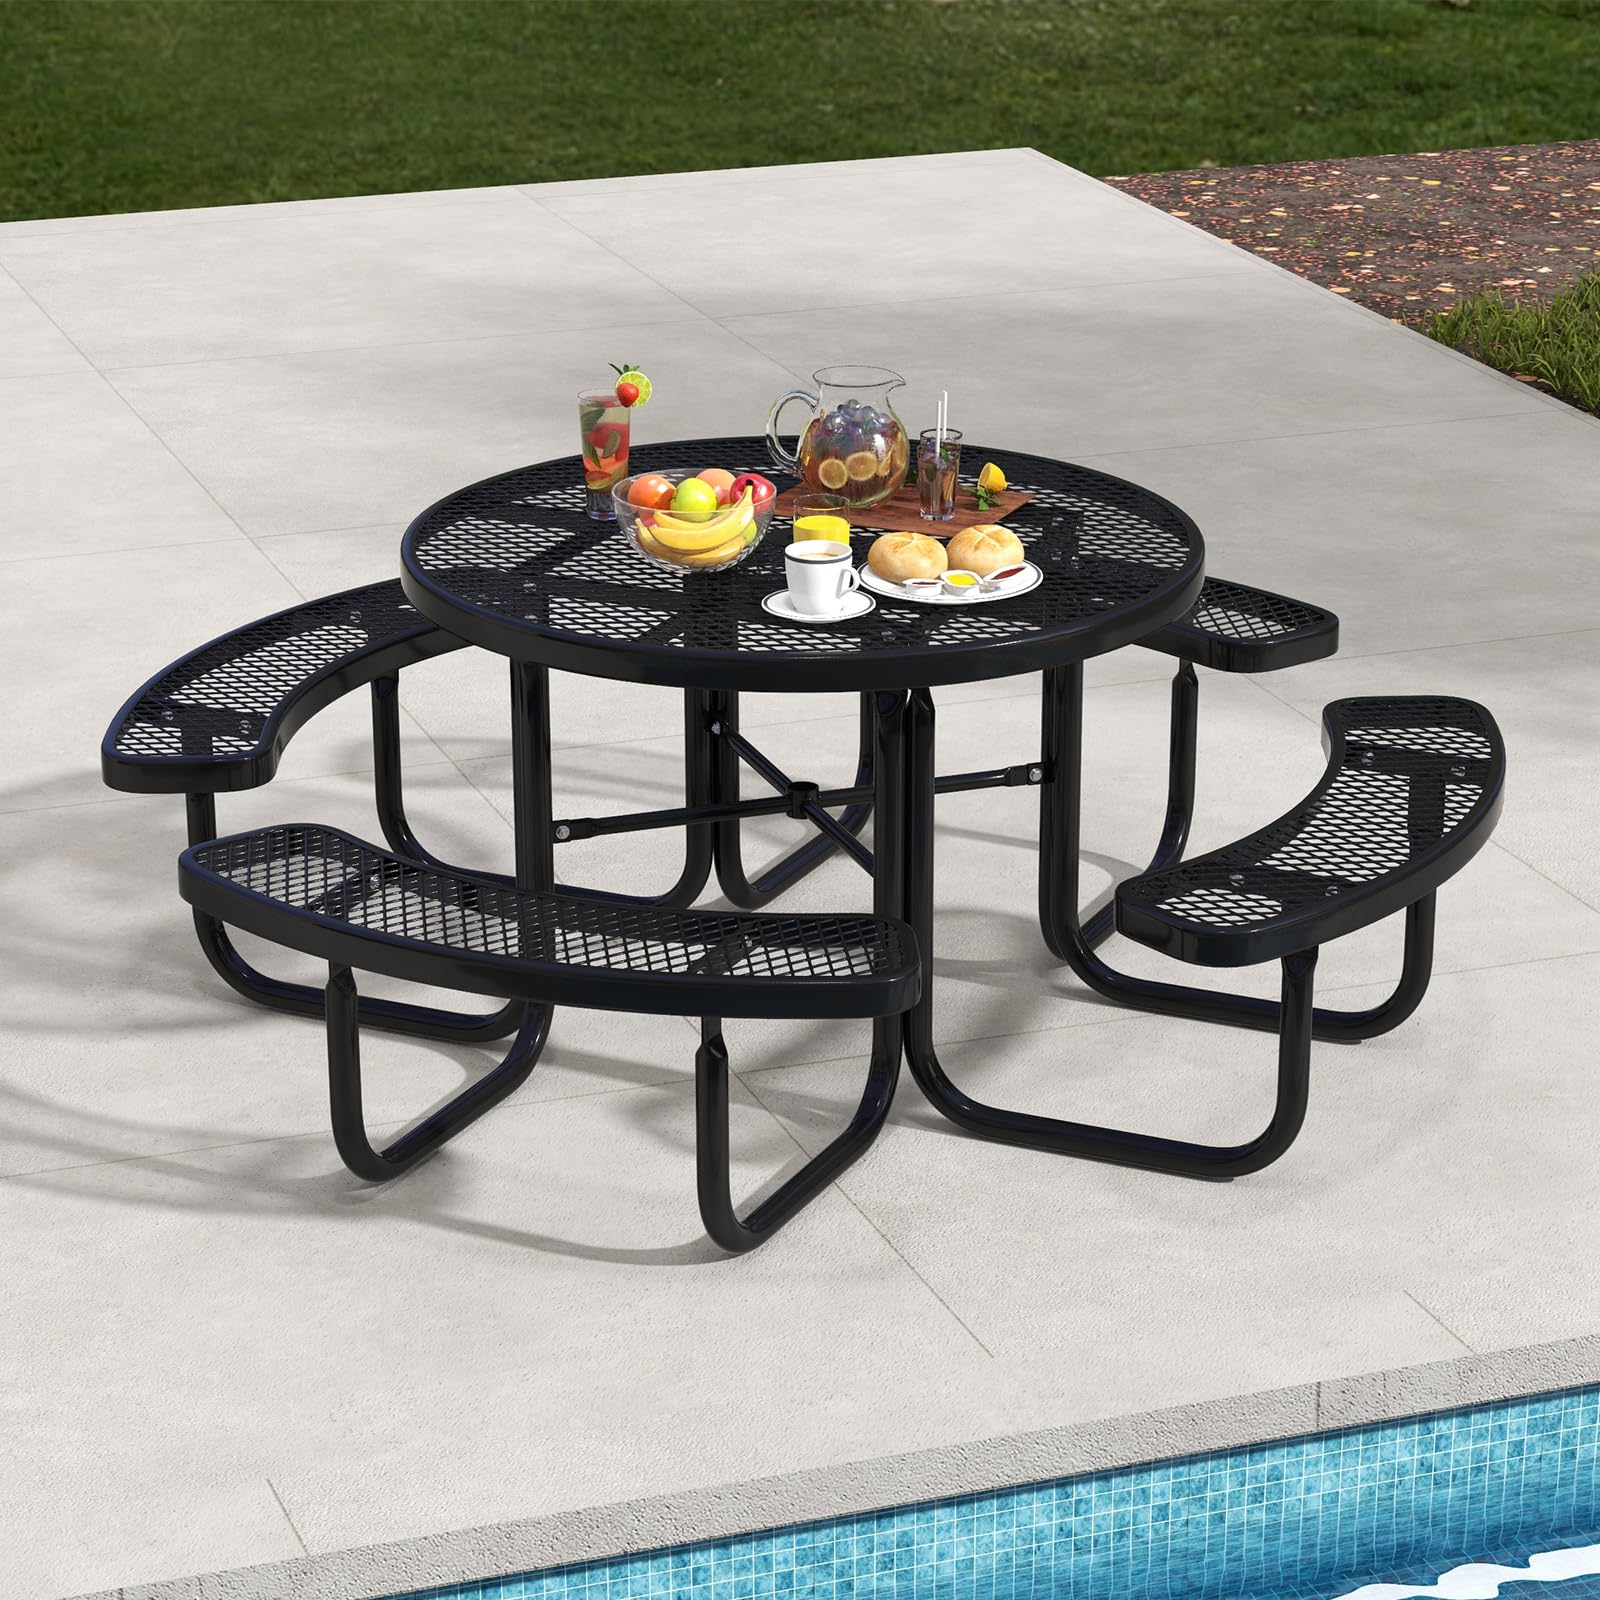 Giantex Round Picnic Table Set for 8 Persons, 45 Inch Outdoor Table and Bench Set with Umbrella Hole